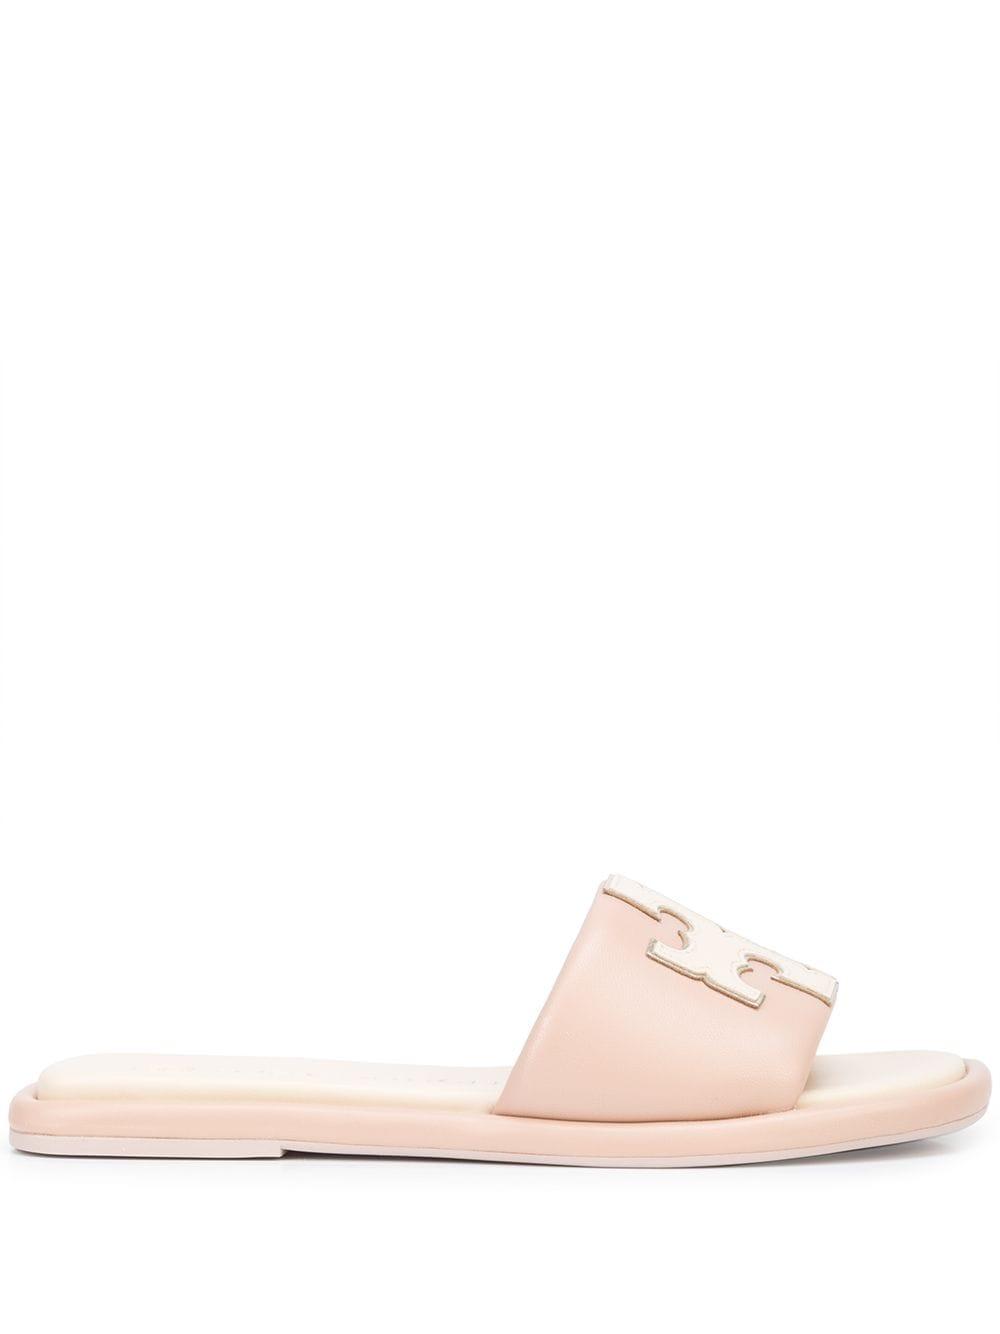 Tory Burch Double T Leather Slides in Pink | Lyst